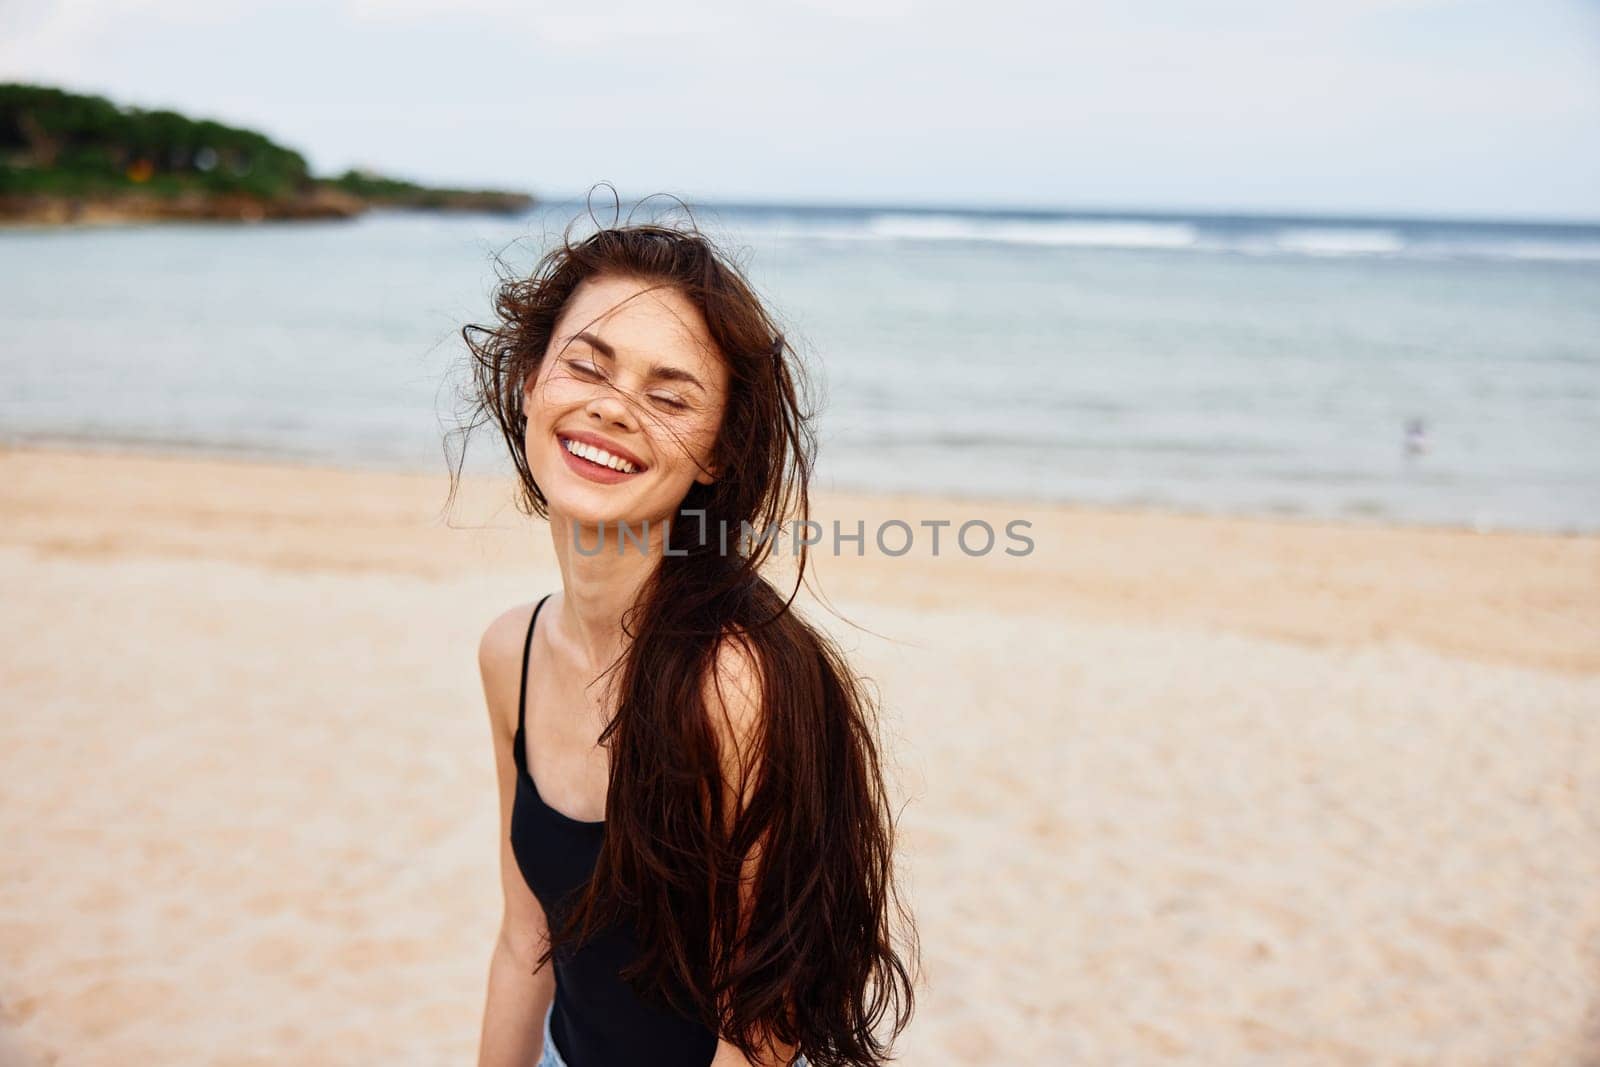 beauty woman dress sea female nature summer outdoor beach sand ocean copy smiling enjoyment young hair space tropical long vacation caucasian running smile